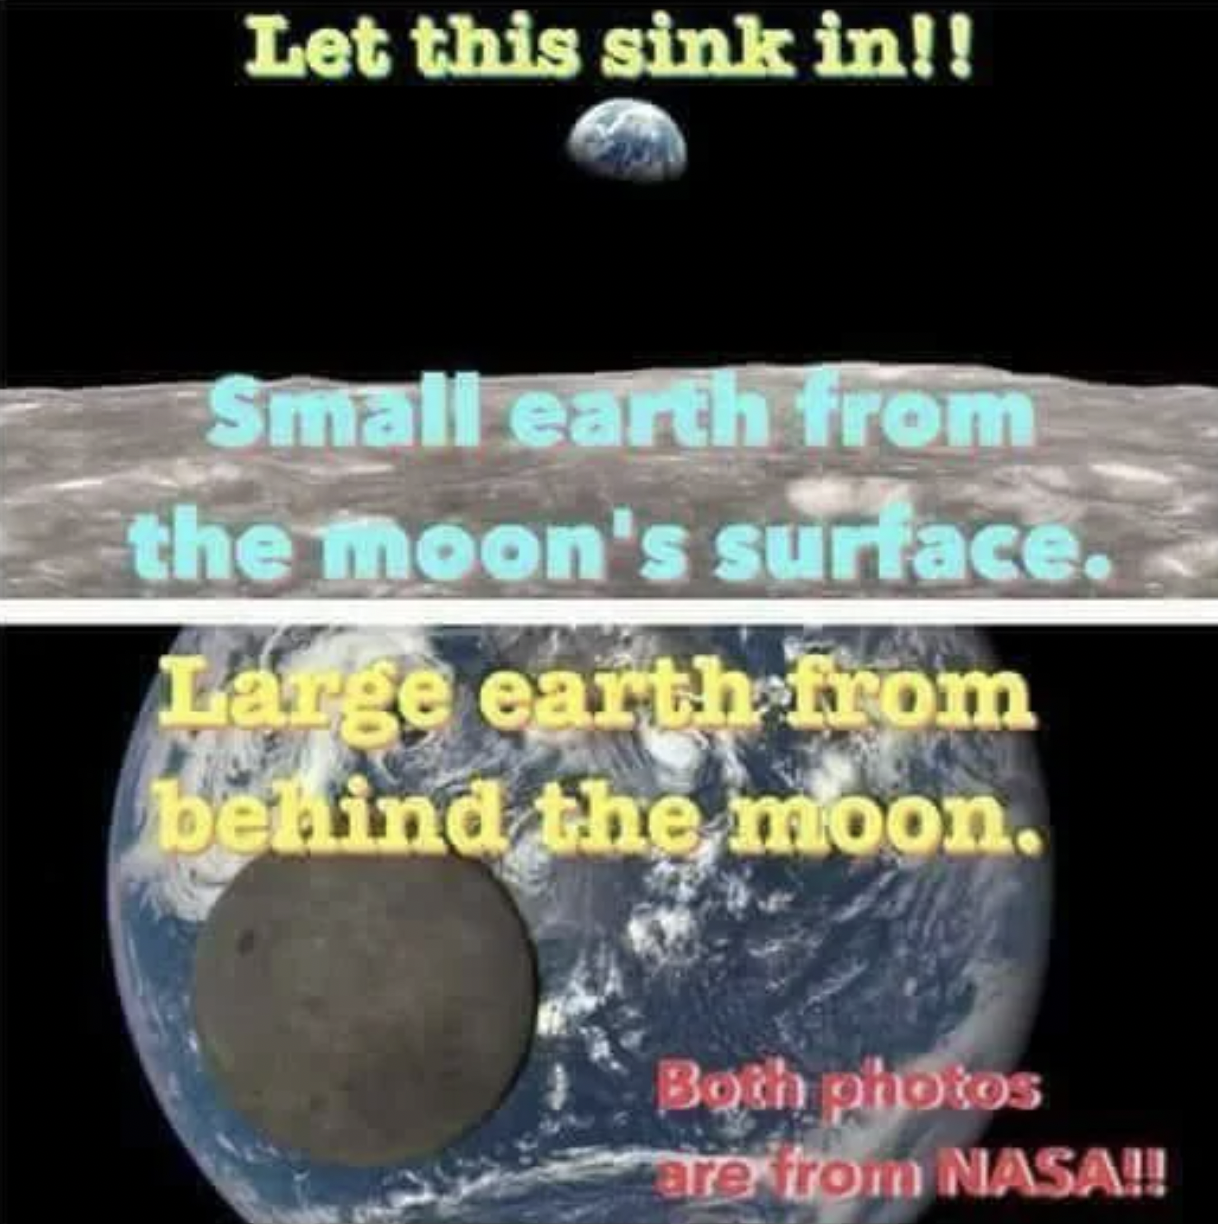 Confidently Incorrect - Let this sink in!! Small earth from the moon's surface. Large earth from Ca behind the moon. Both photos are from Nasa!!